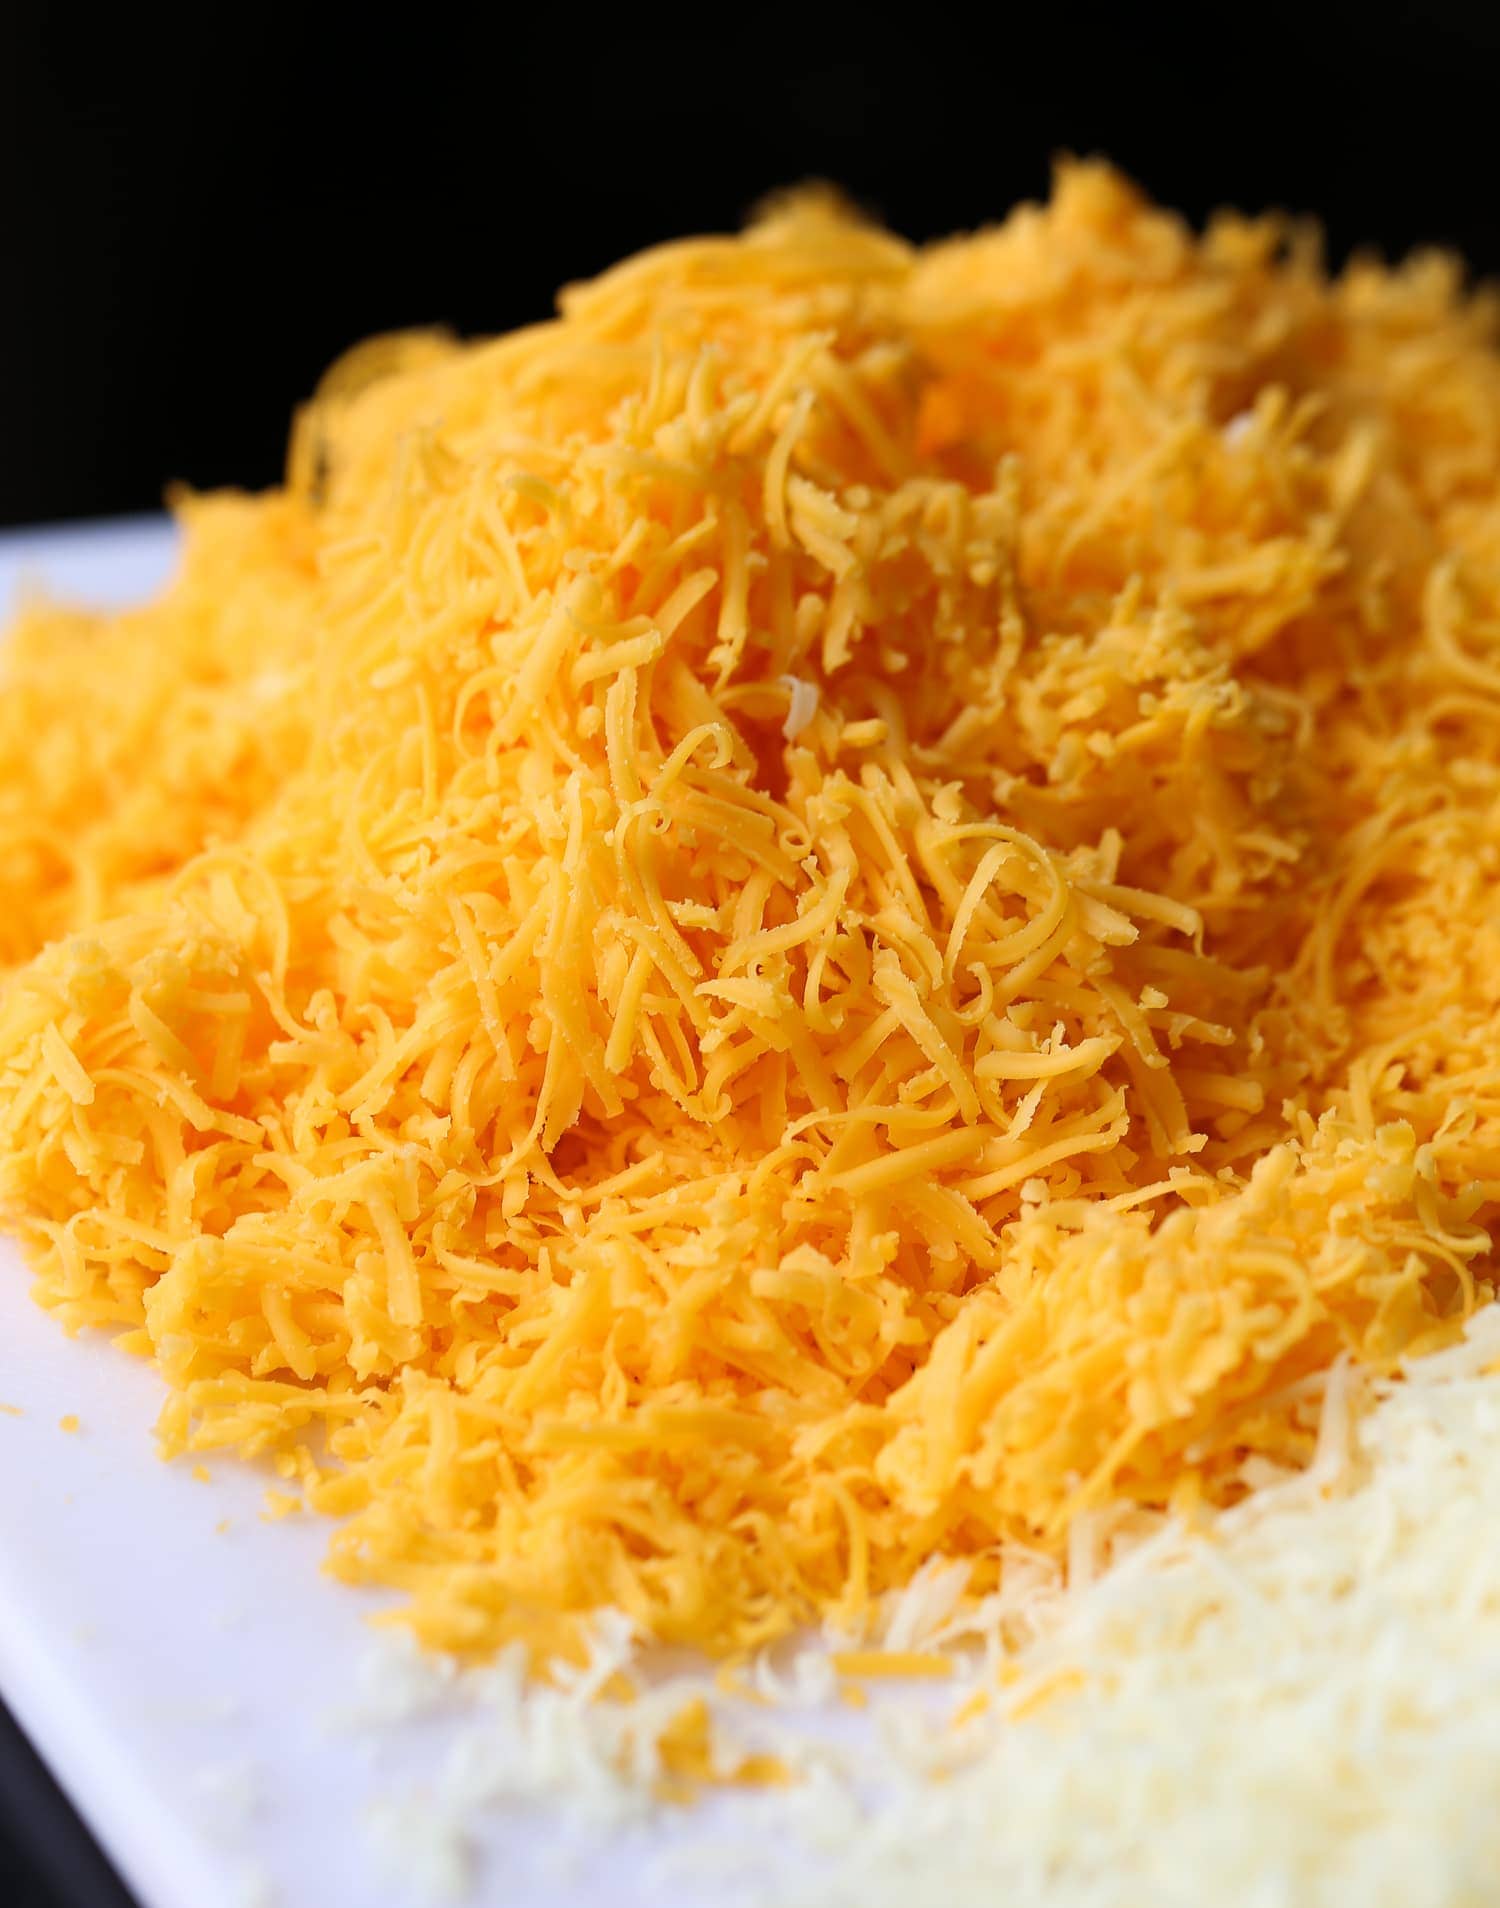 A pile of grated cheddar cheese